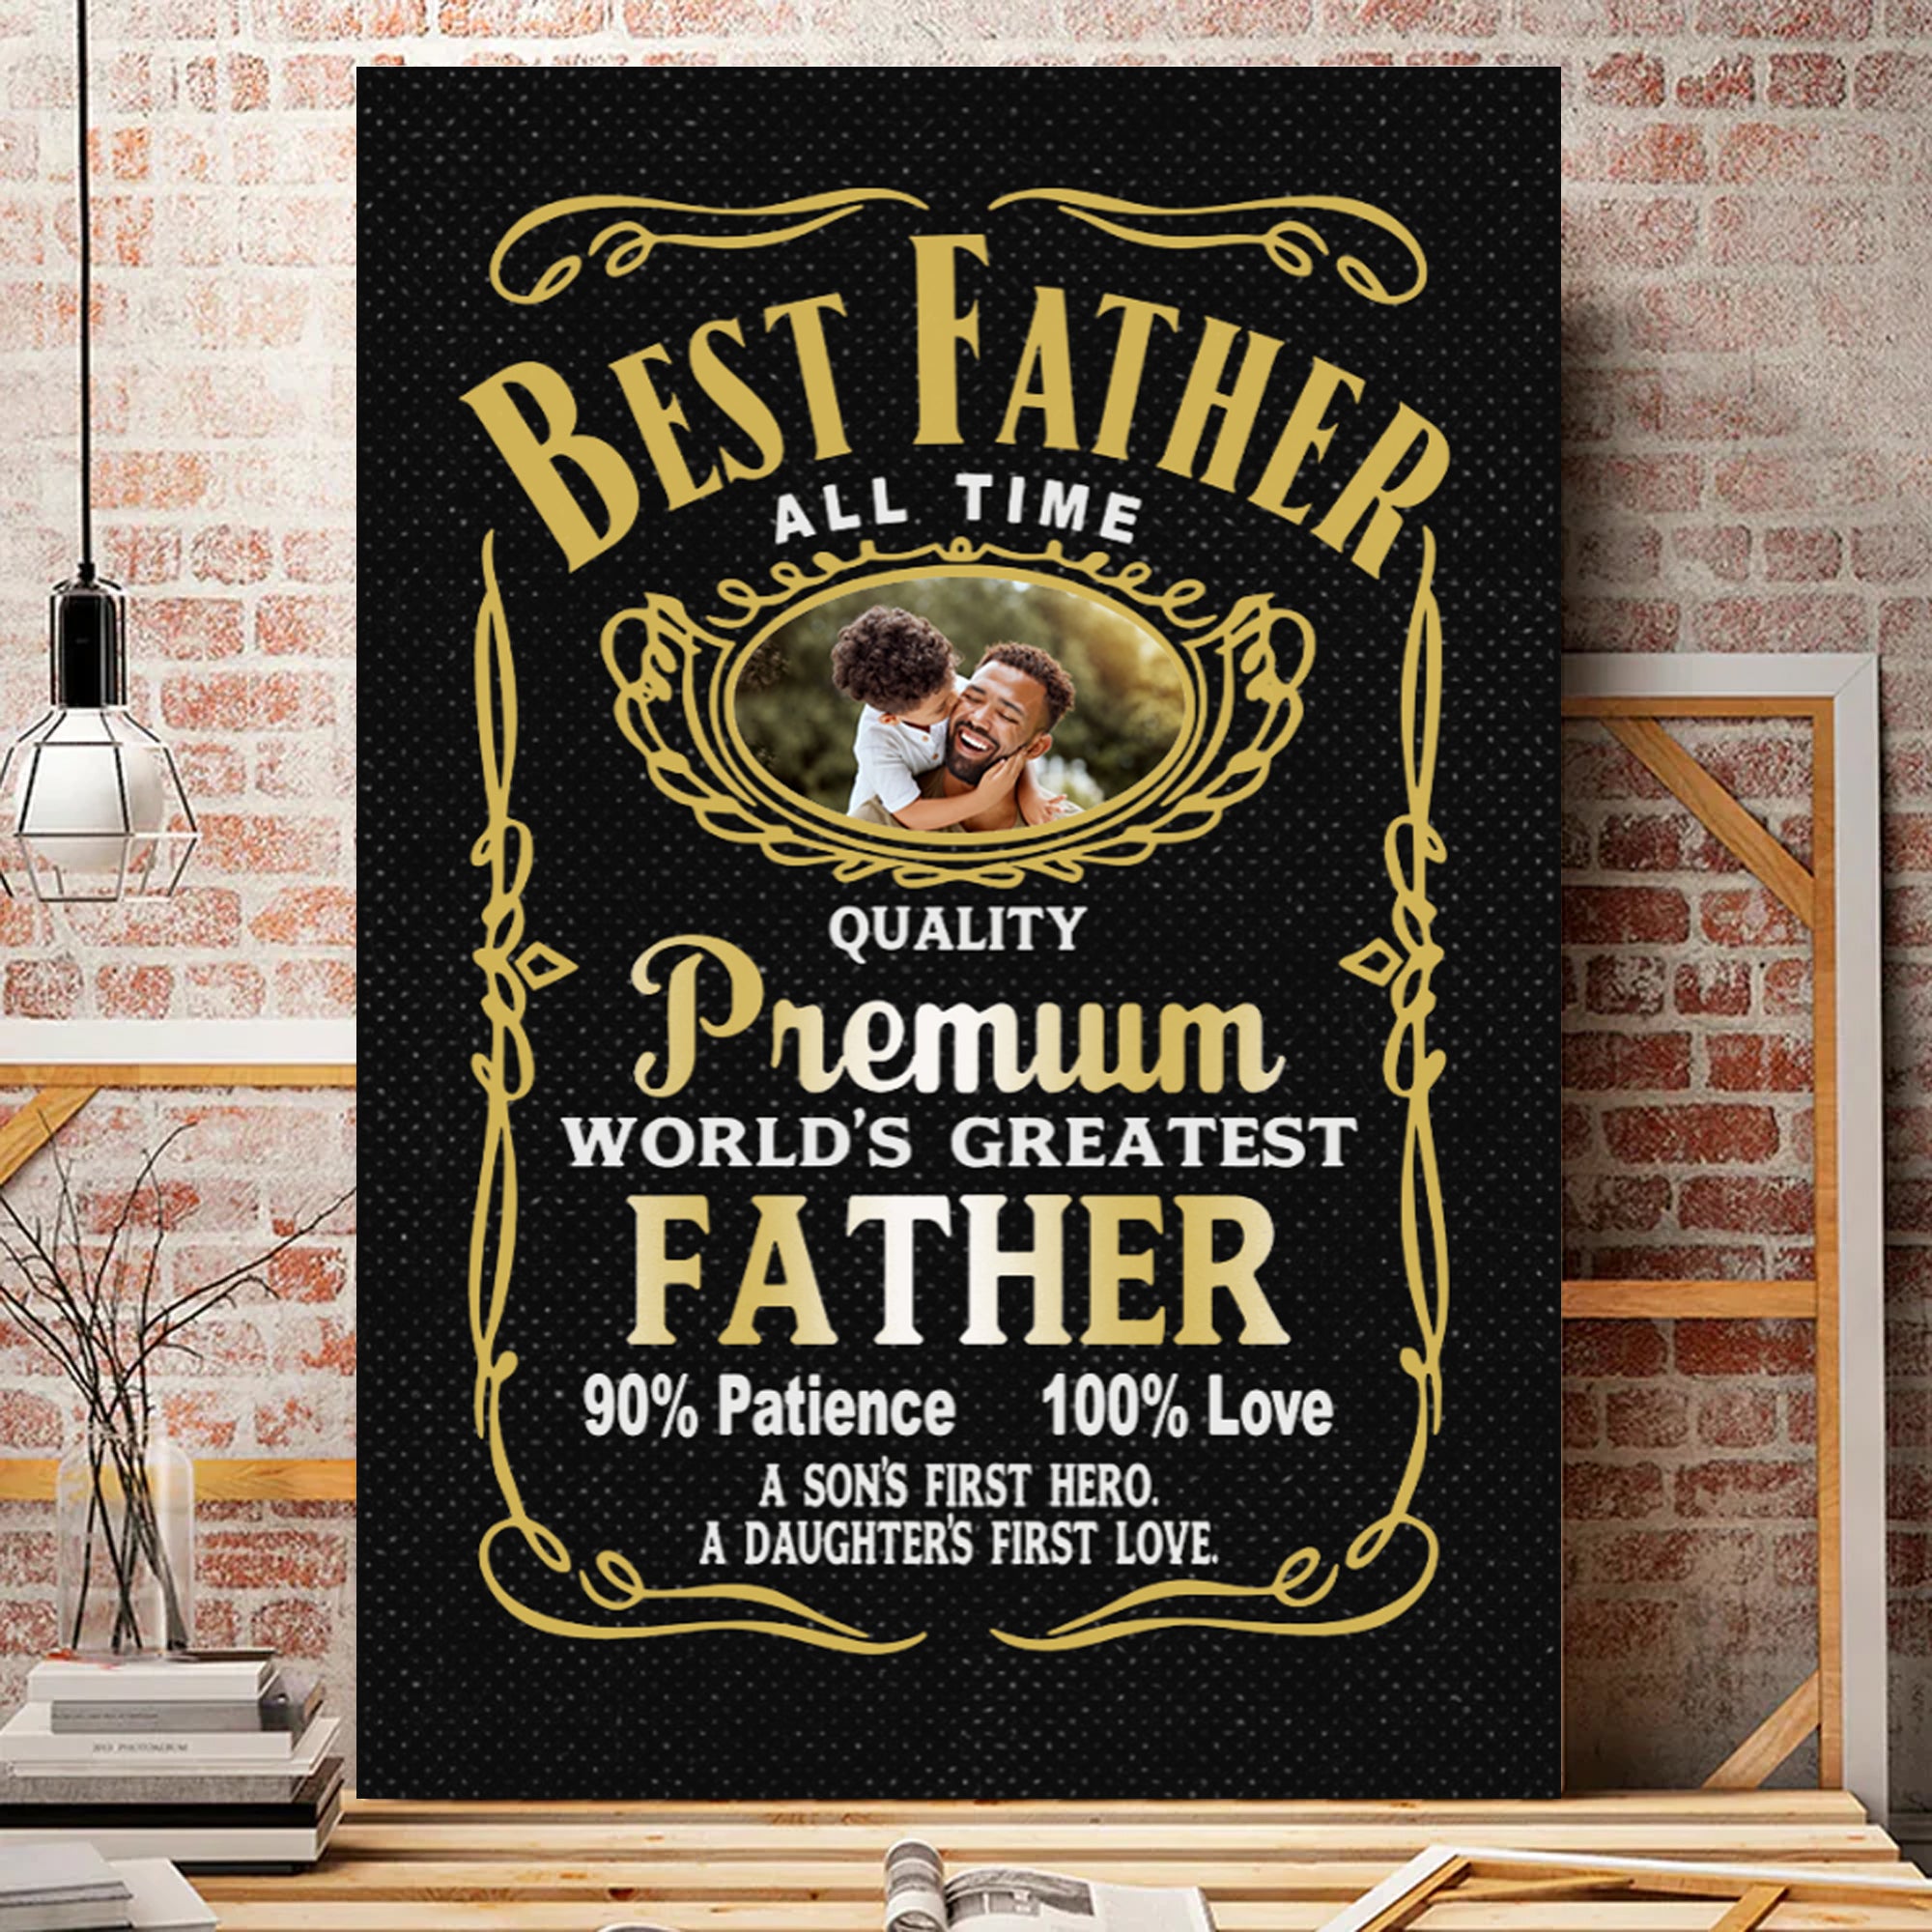 Best Father All Time Premium Quality - Gift For Dad - Personalized Canvas